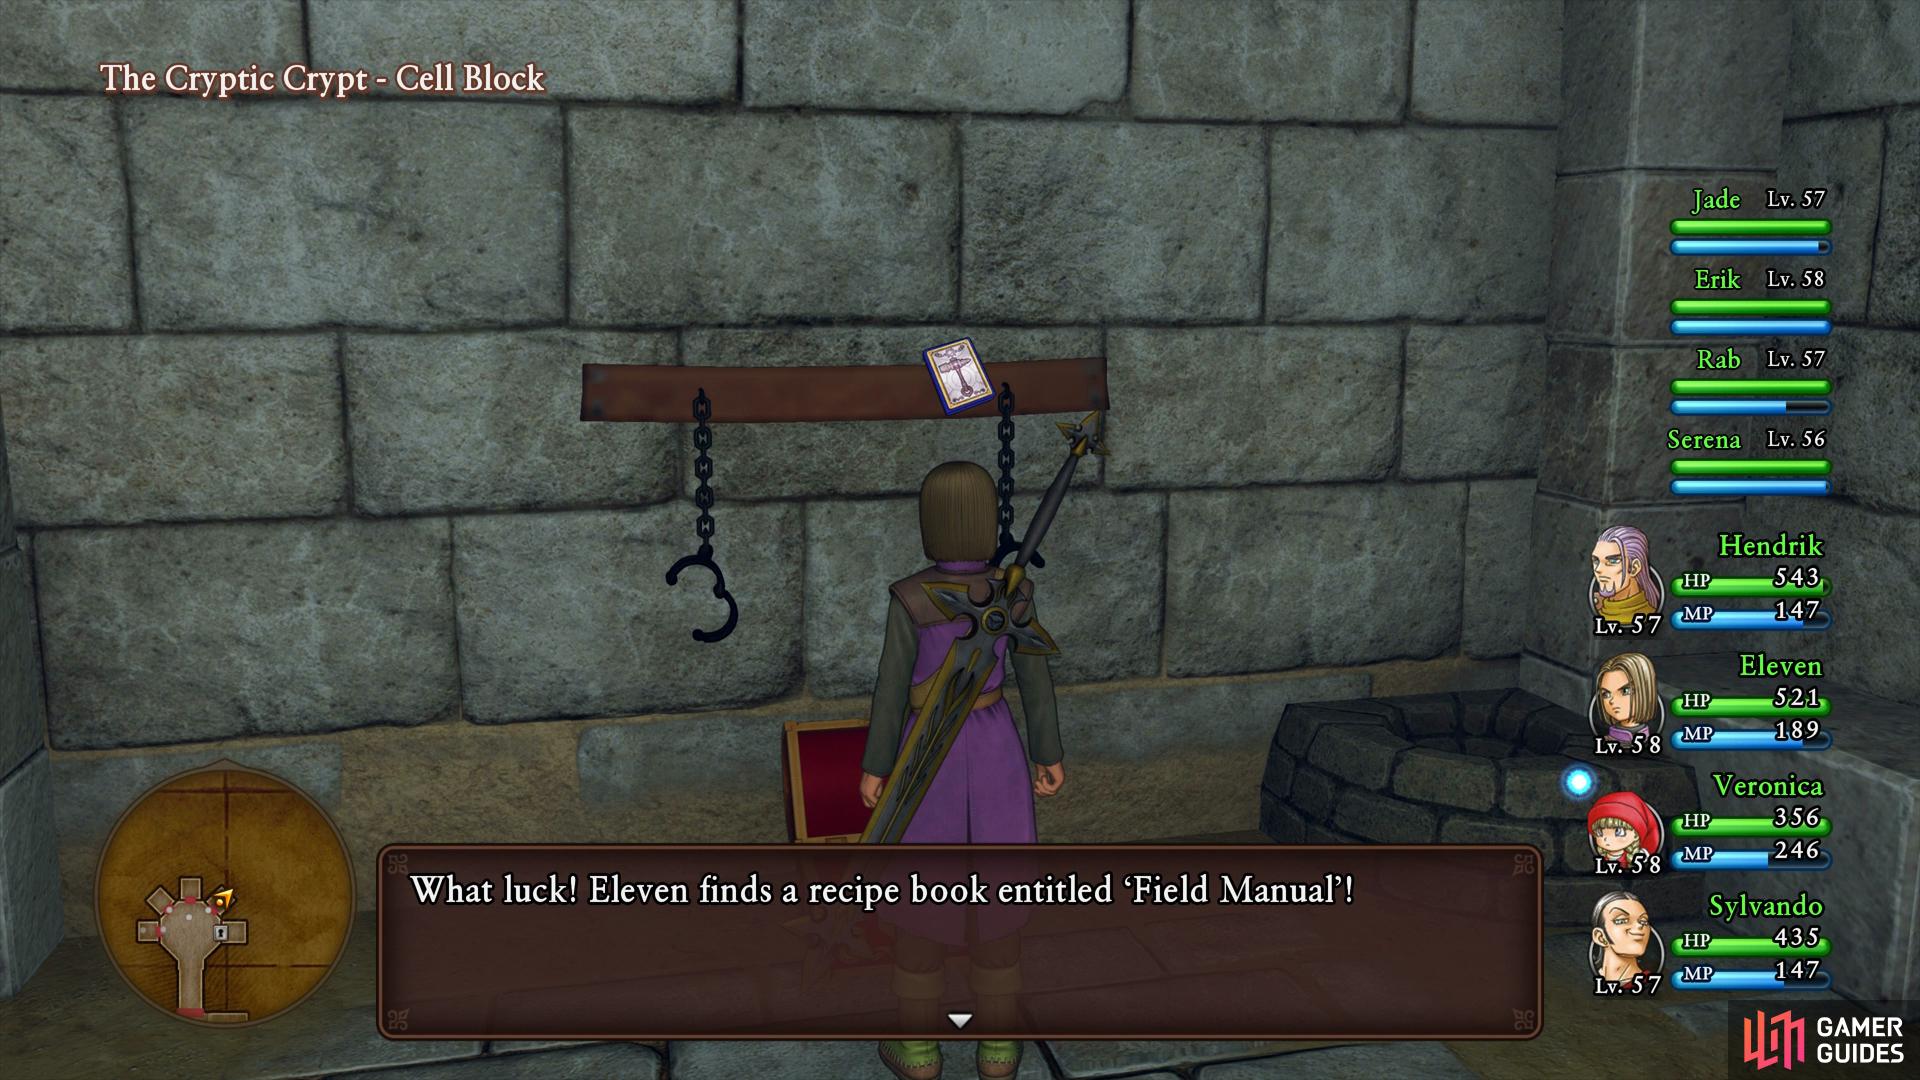 This Recipe Book will contain a new costume for Hendrick.